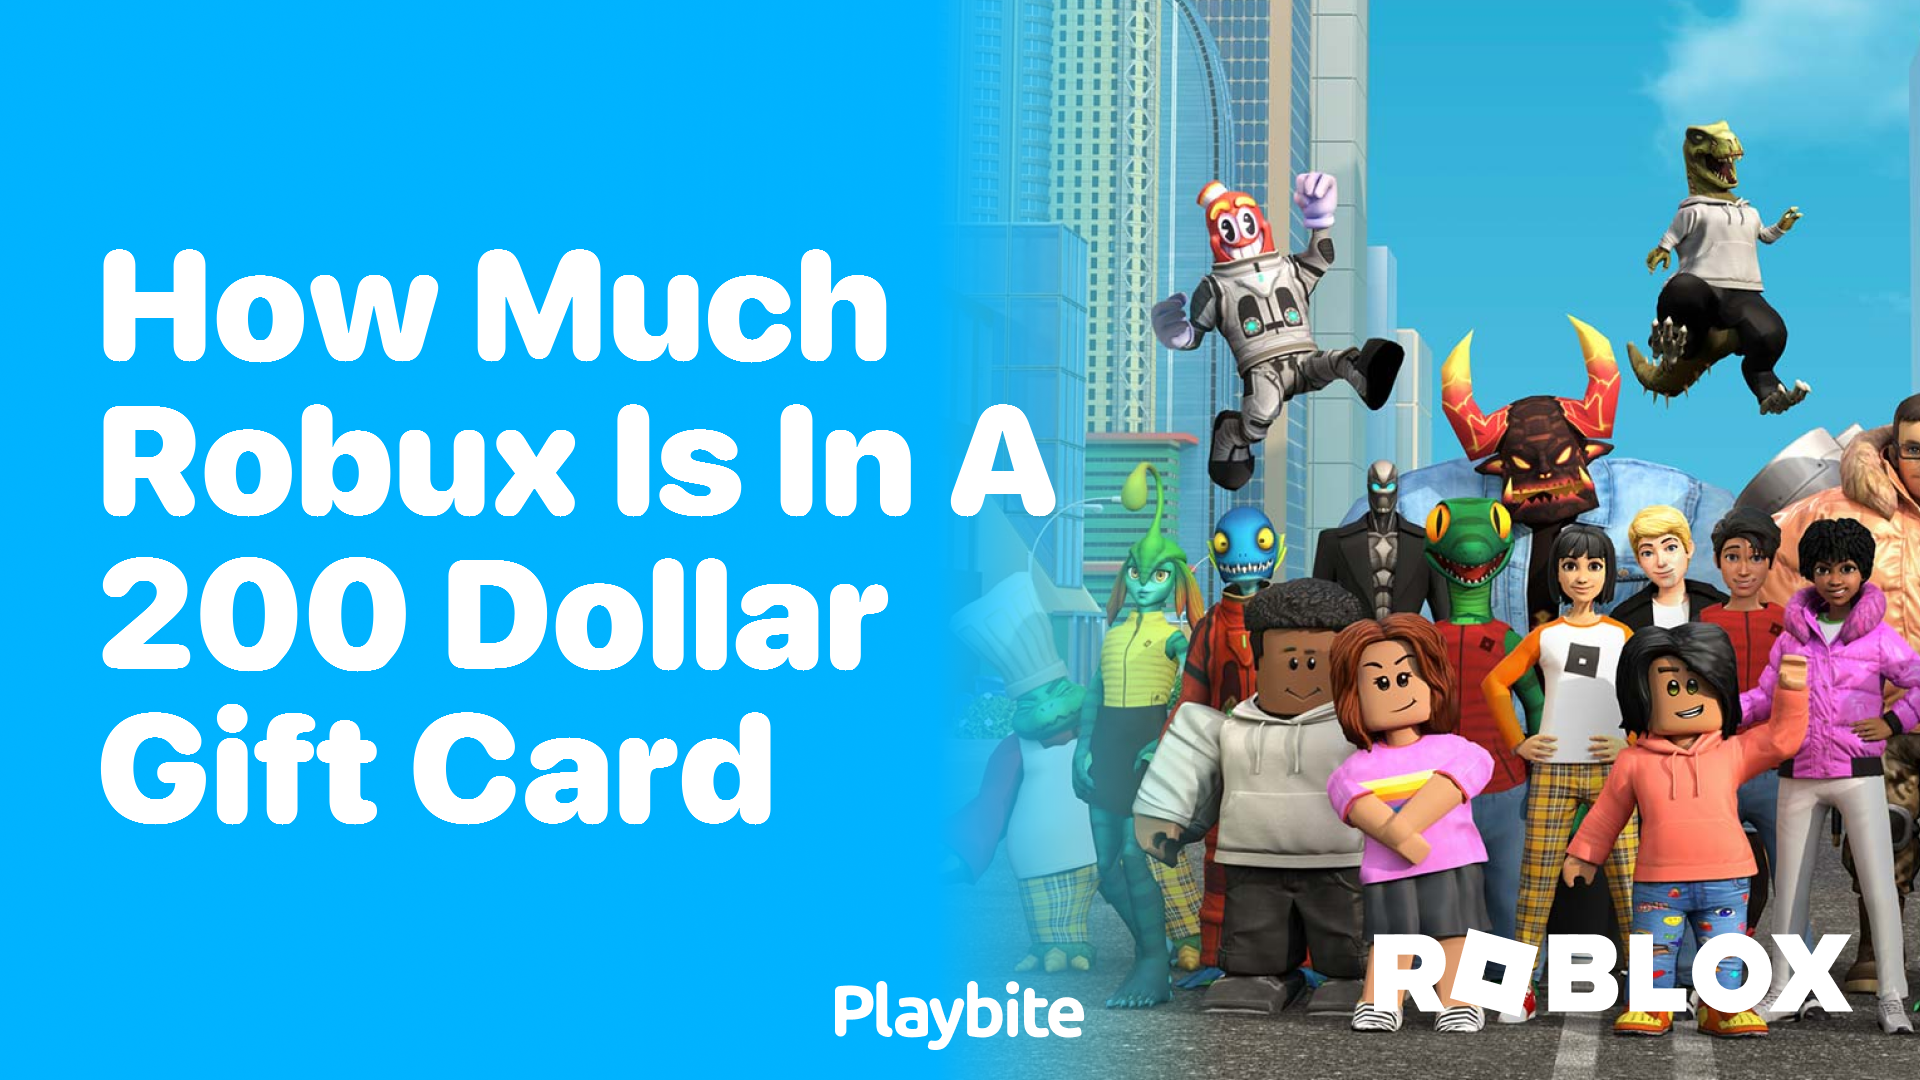 How Much Robux Is in a $200 Gift Card?